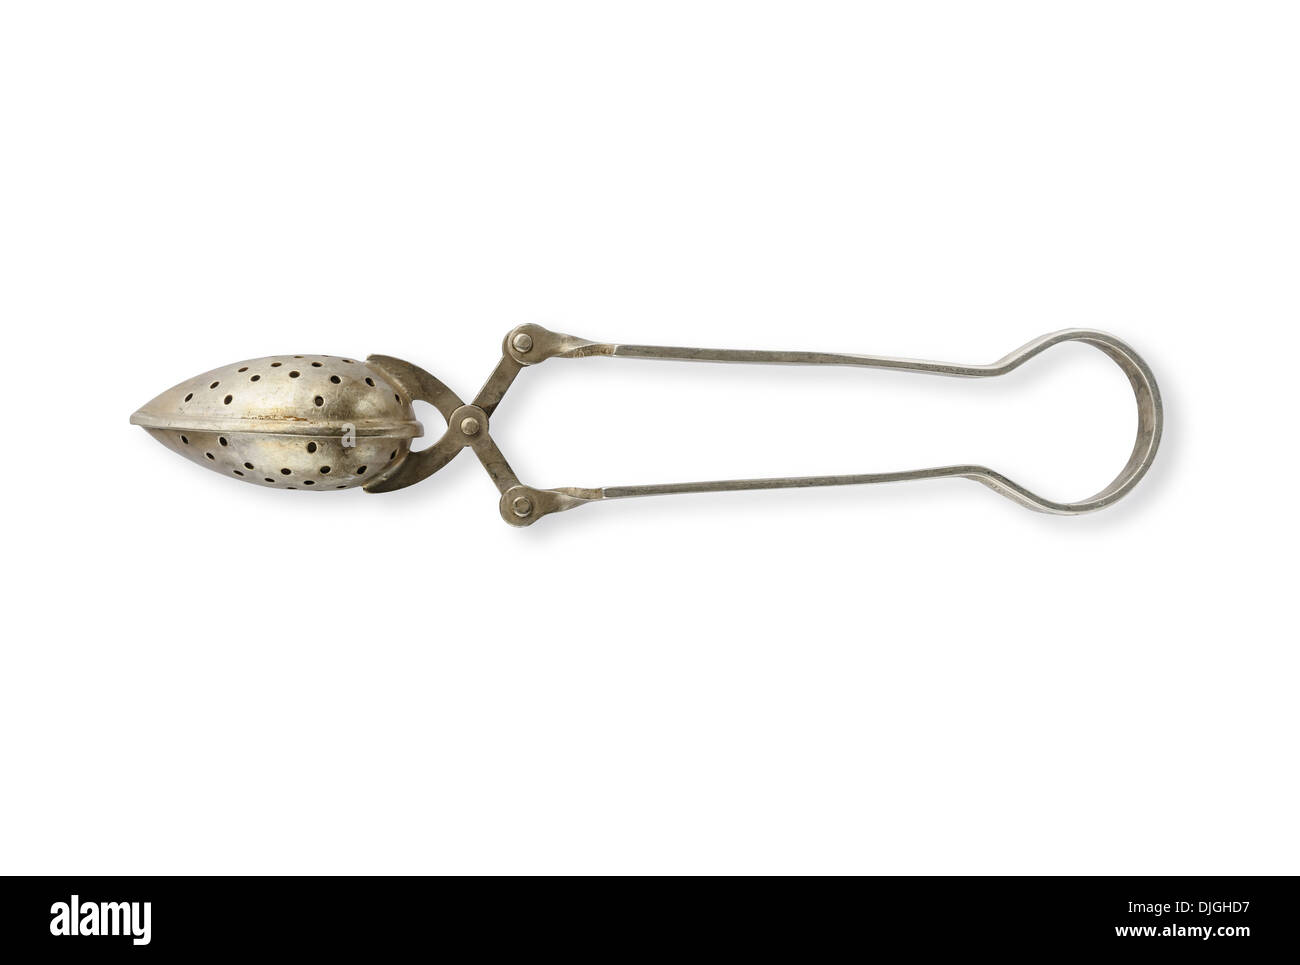 An antique tea strainer in silver metal Stock Photo